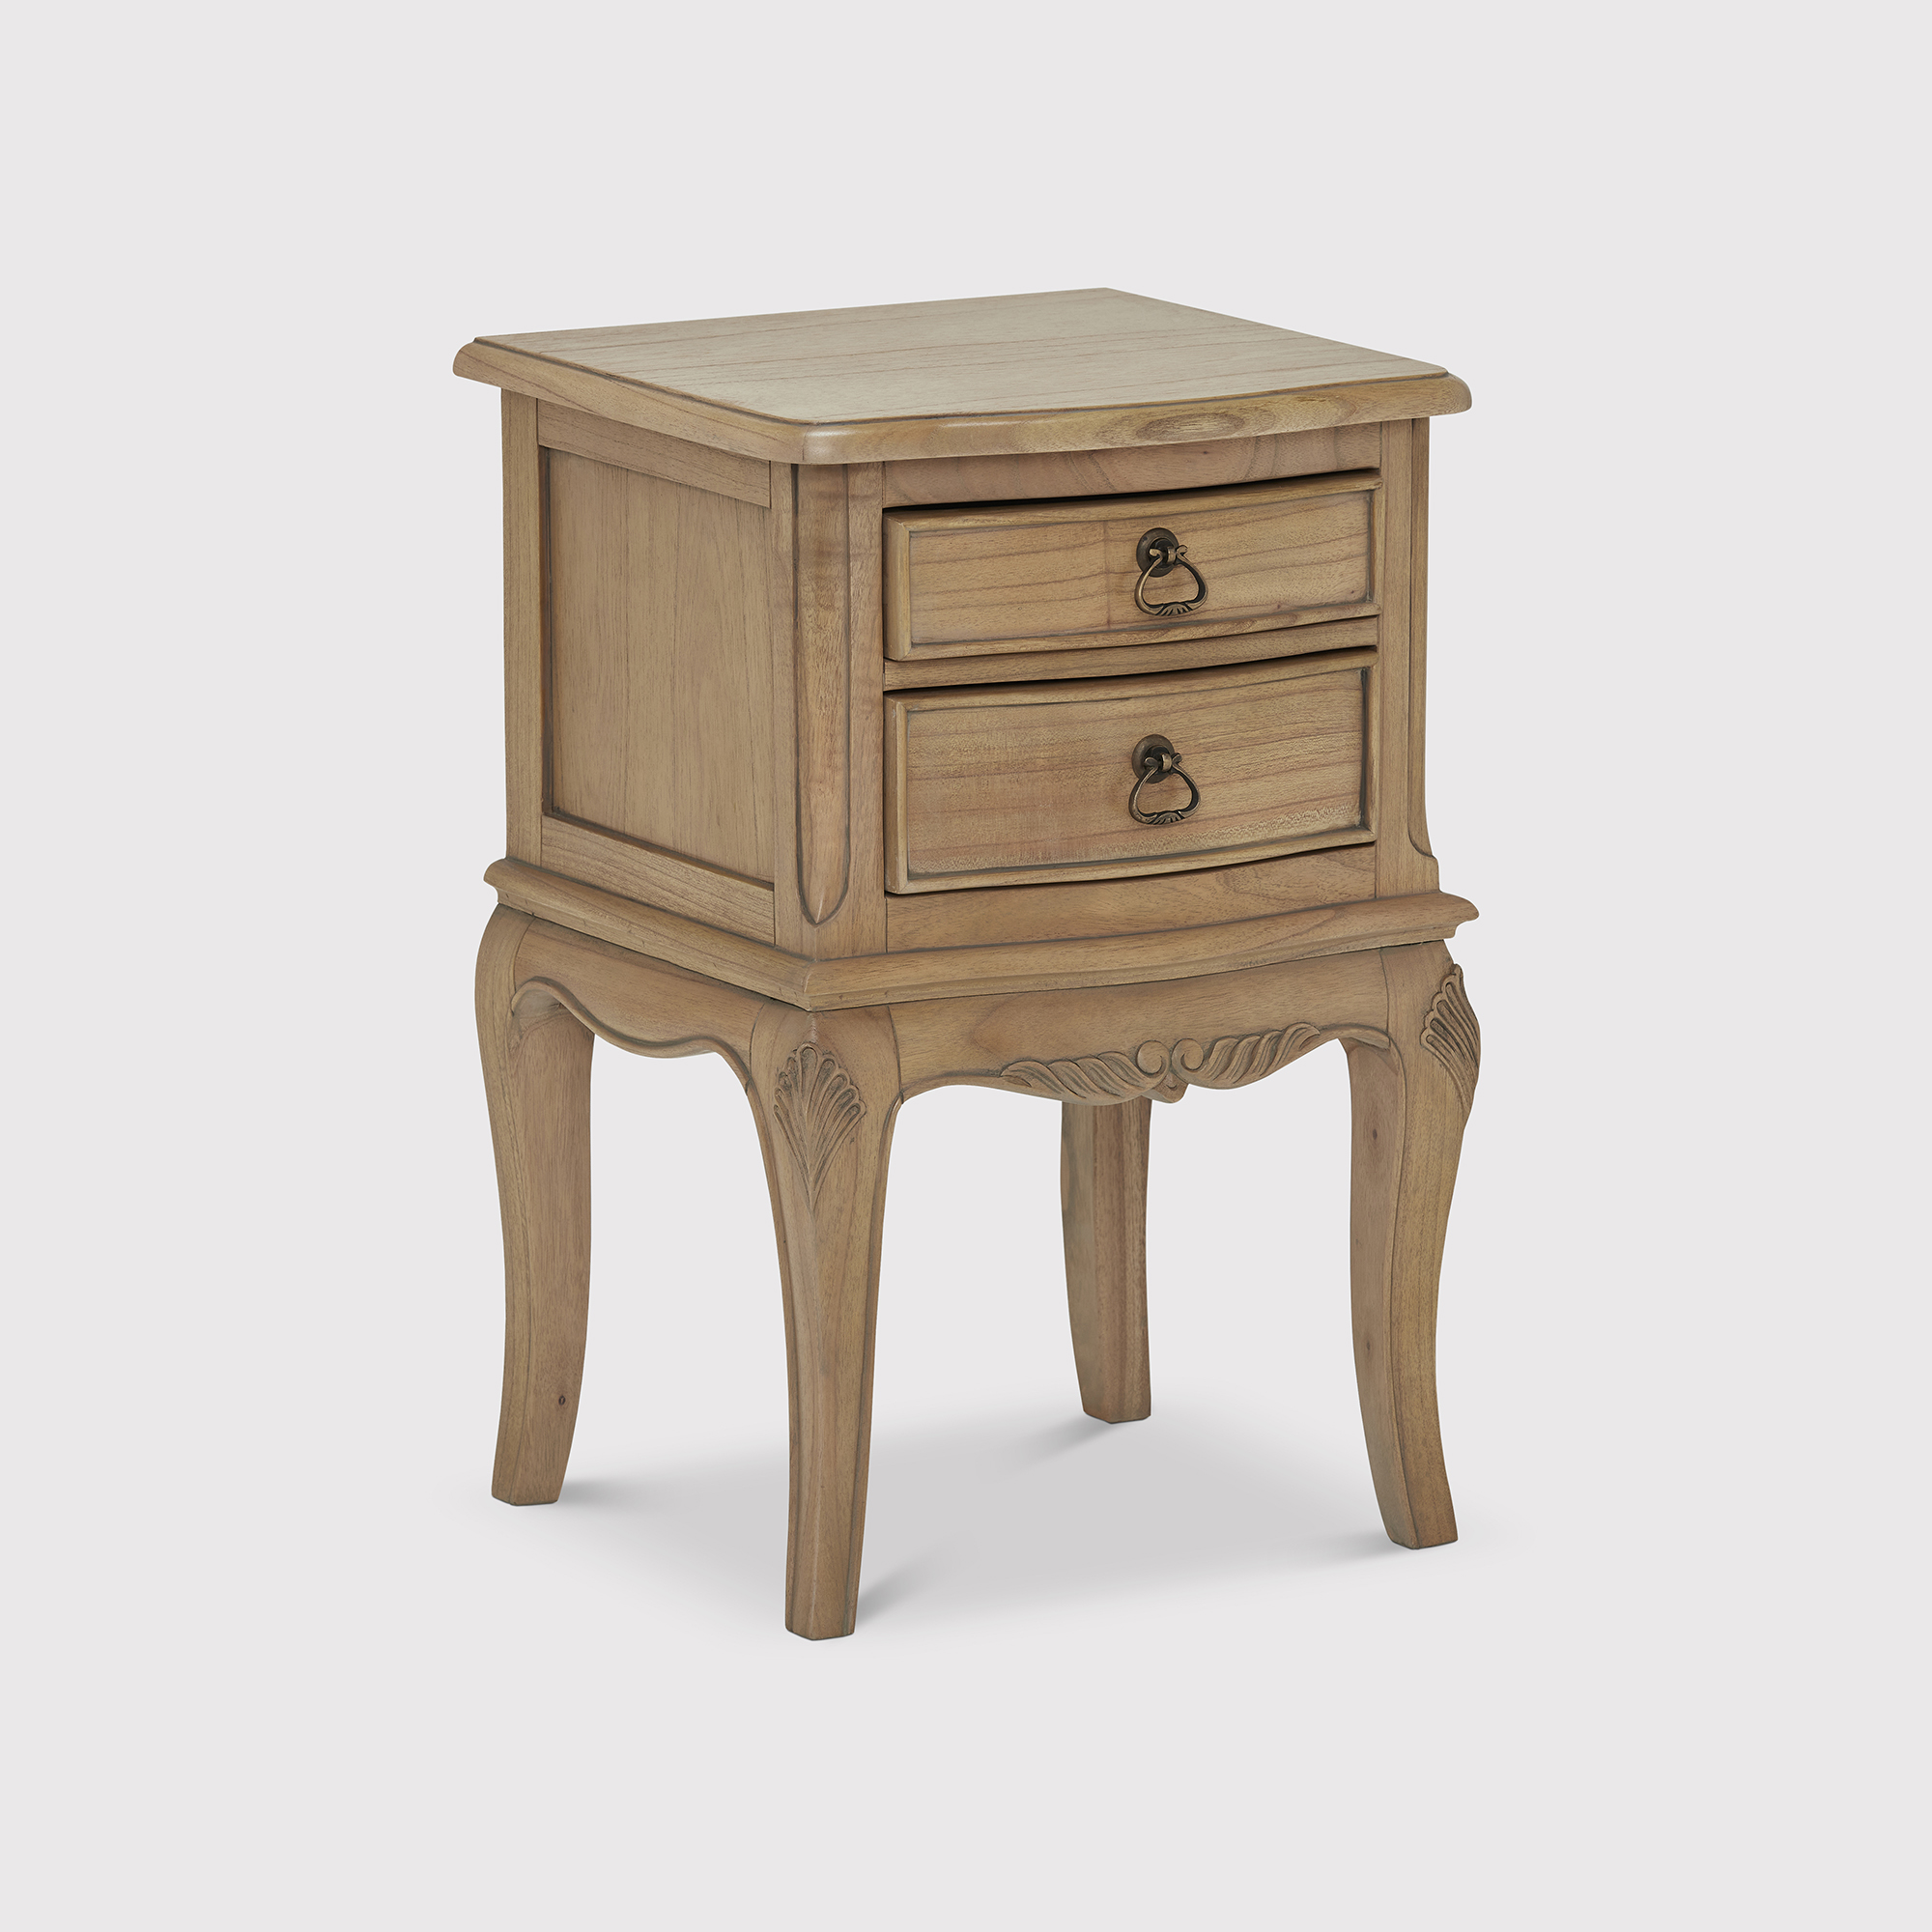 Lille 2 Drawer Bedside Table, Neutral Wood | Barker & Stonehouse